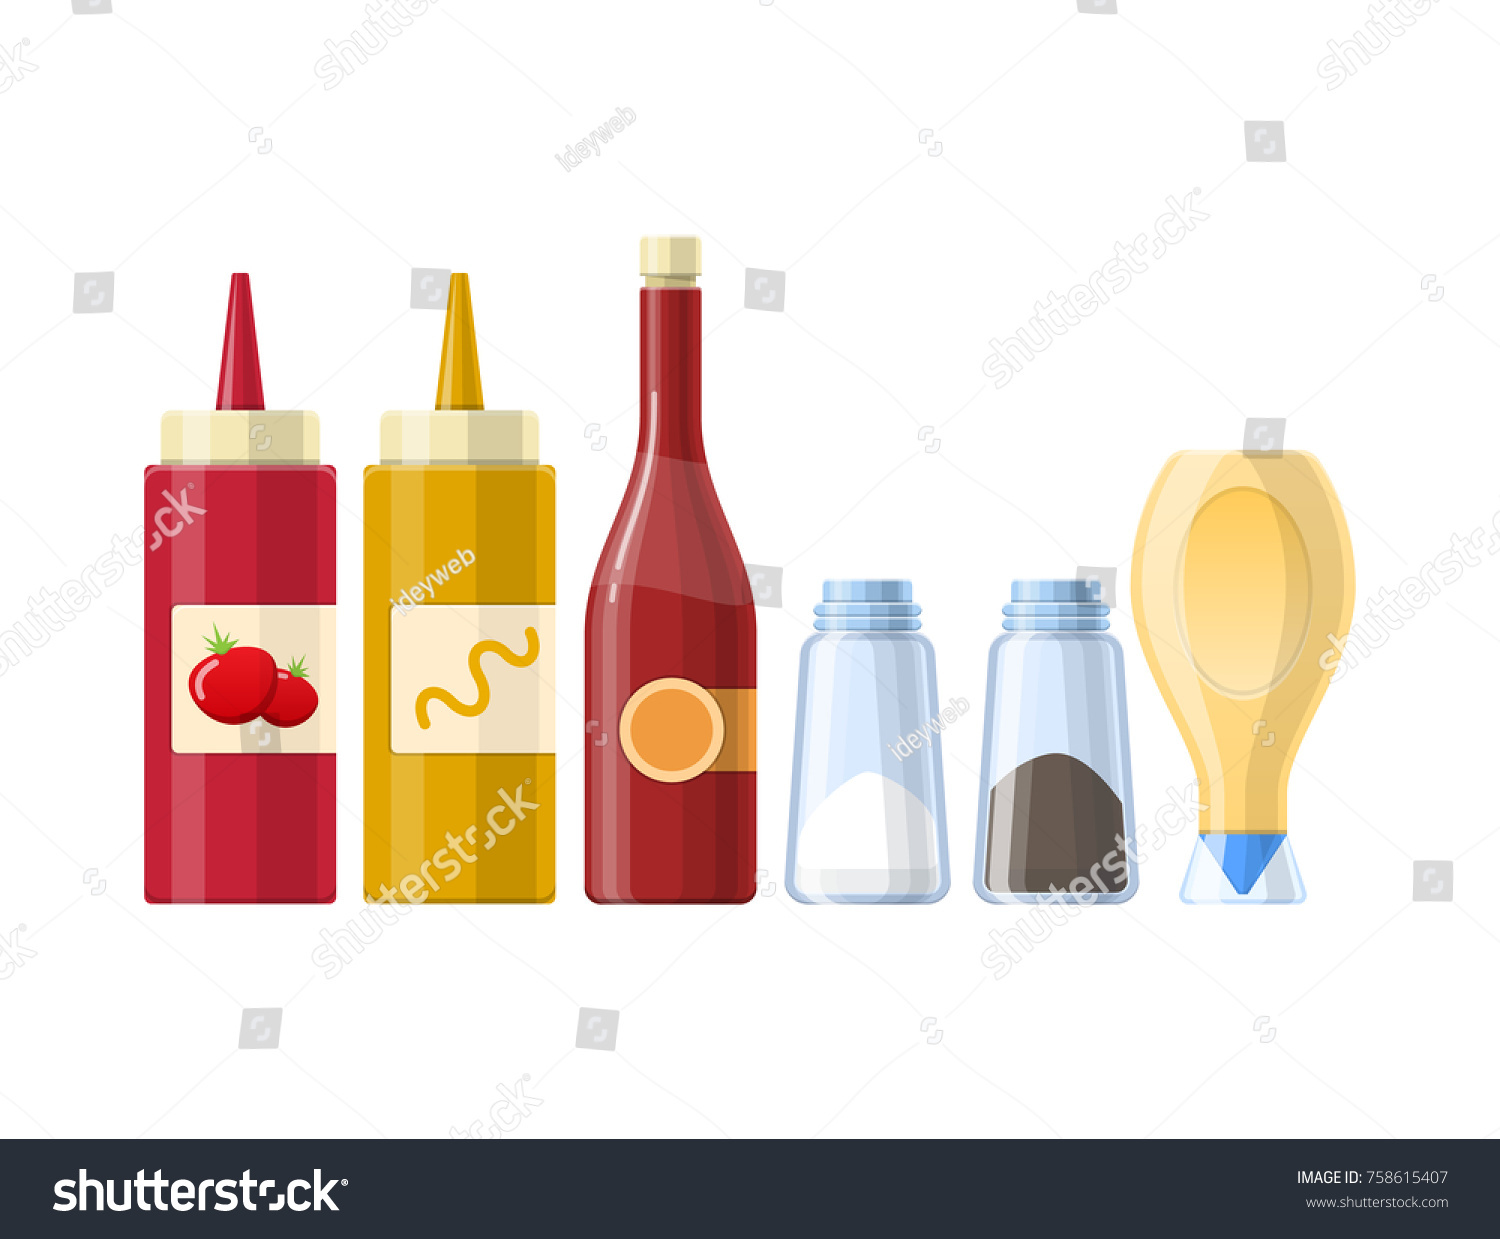 Set of sauces, spices, condiments ketchup, mustard, salt, black pepper, mayonnaise, butter, in beautiful realistic bottles, packages. Condiments and sauces for kitchen cooking Vector illustration #758615407